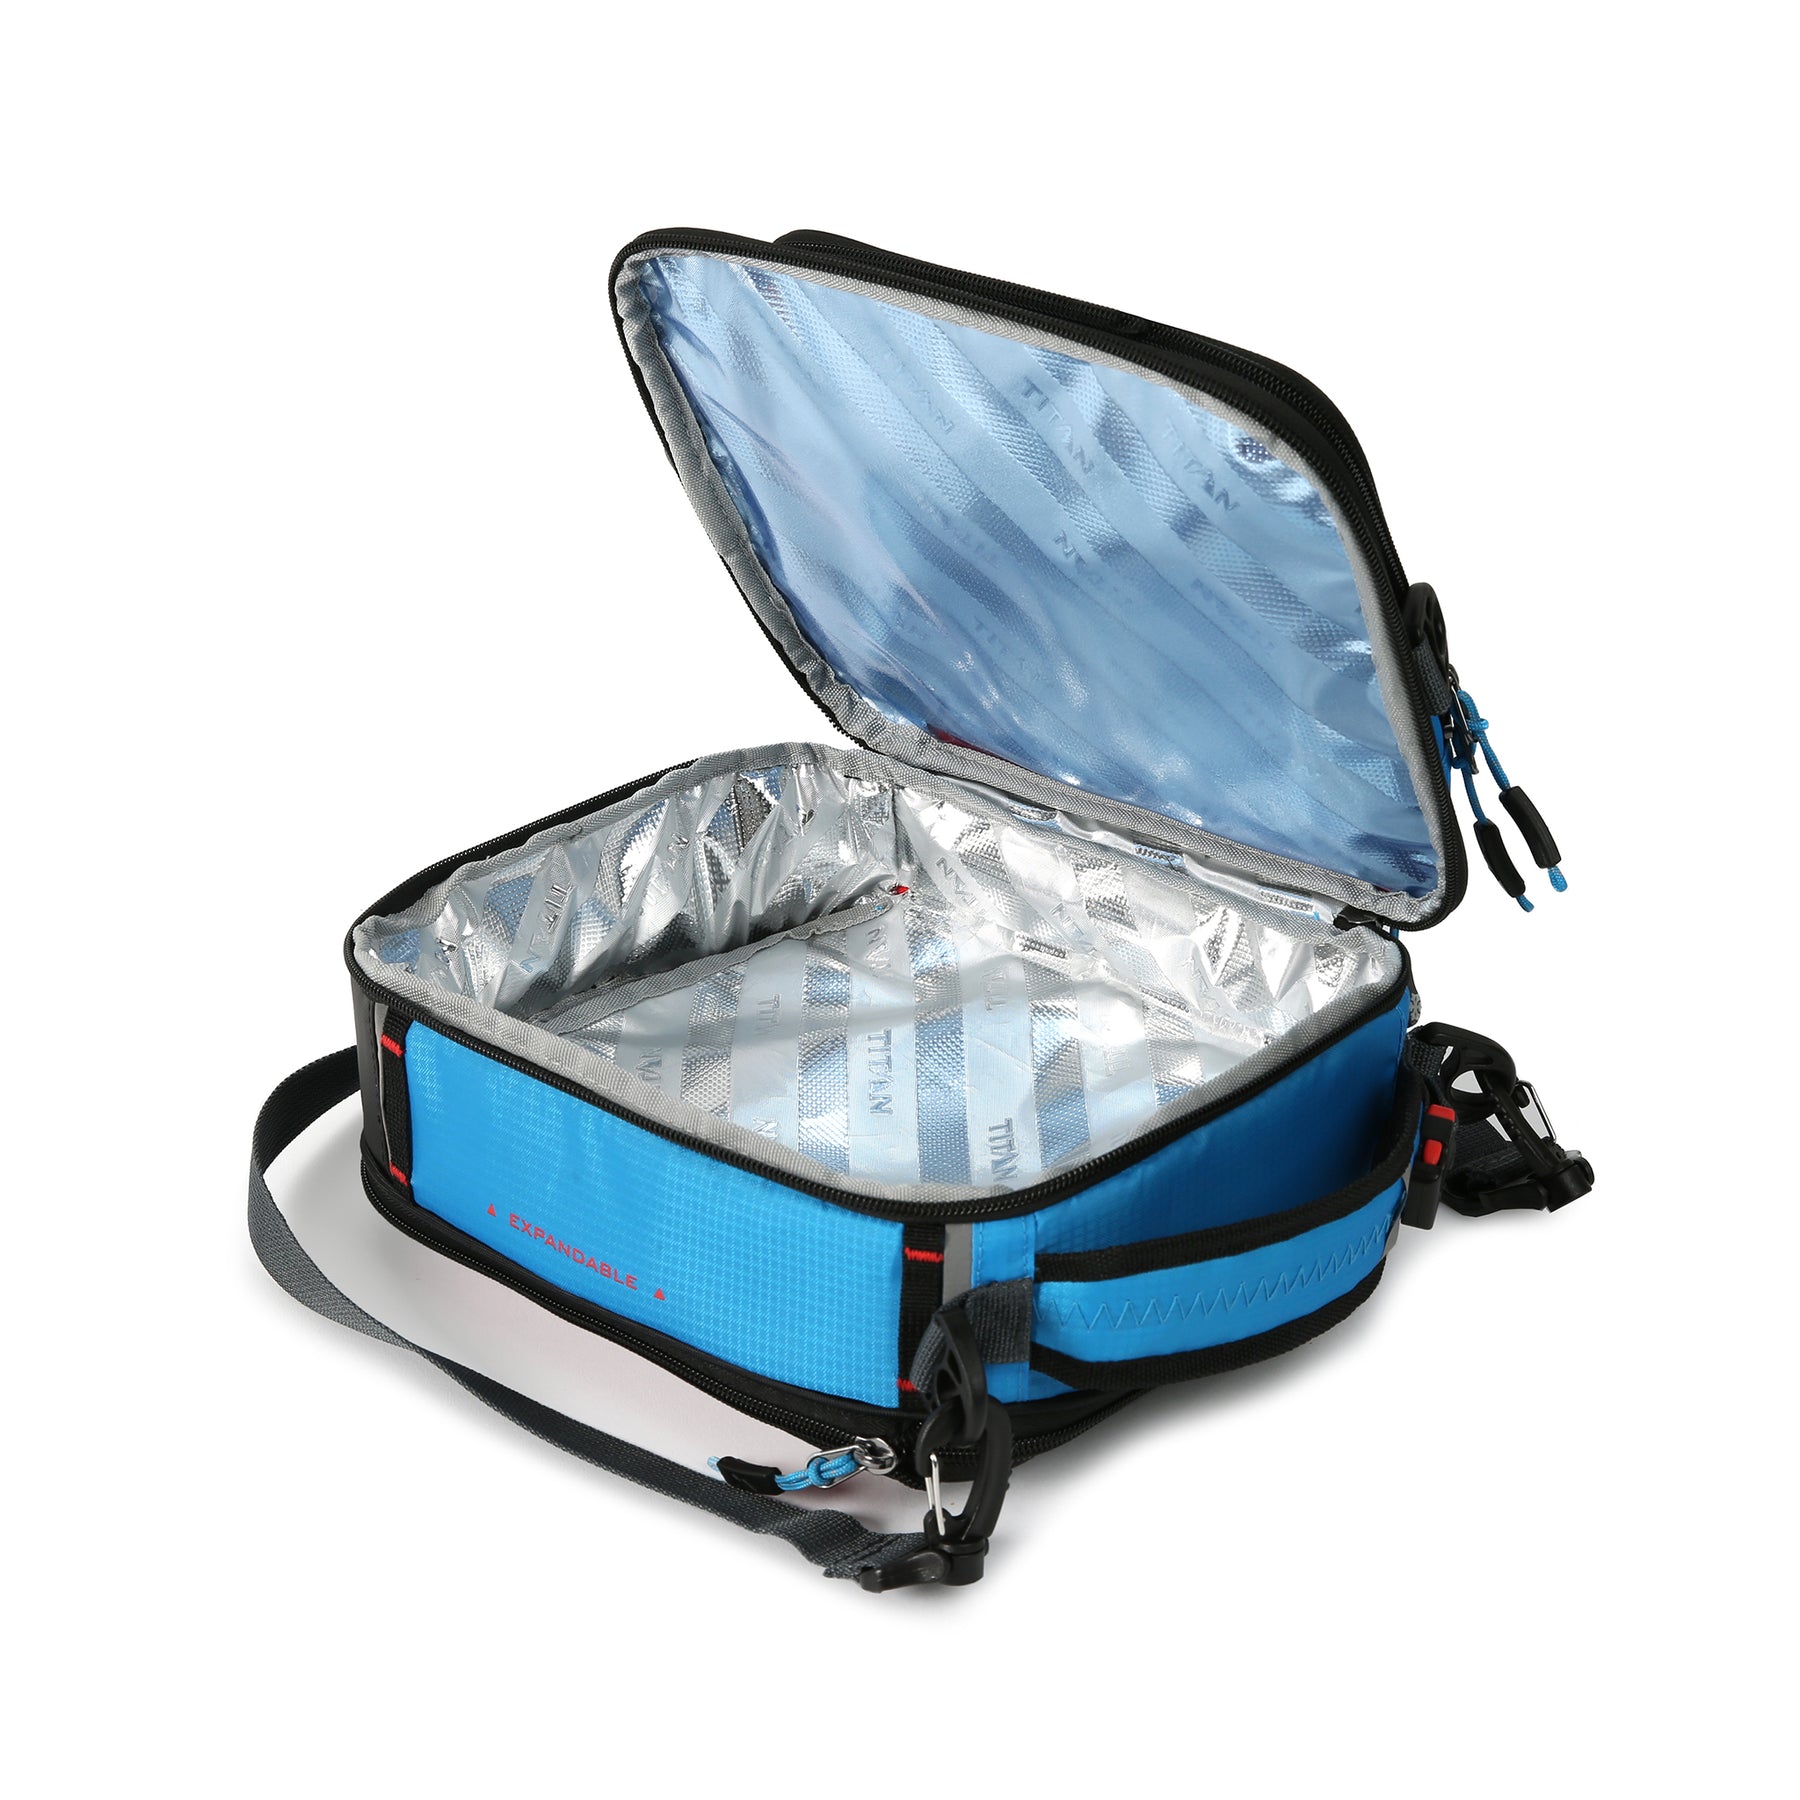 Titan by Arctic Zone™ Fridge Cold Expandable Lunch Bag with 2 Ice